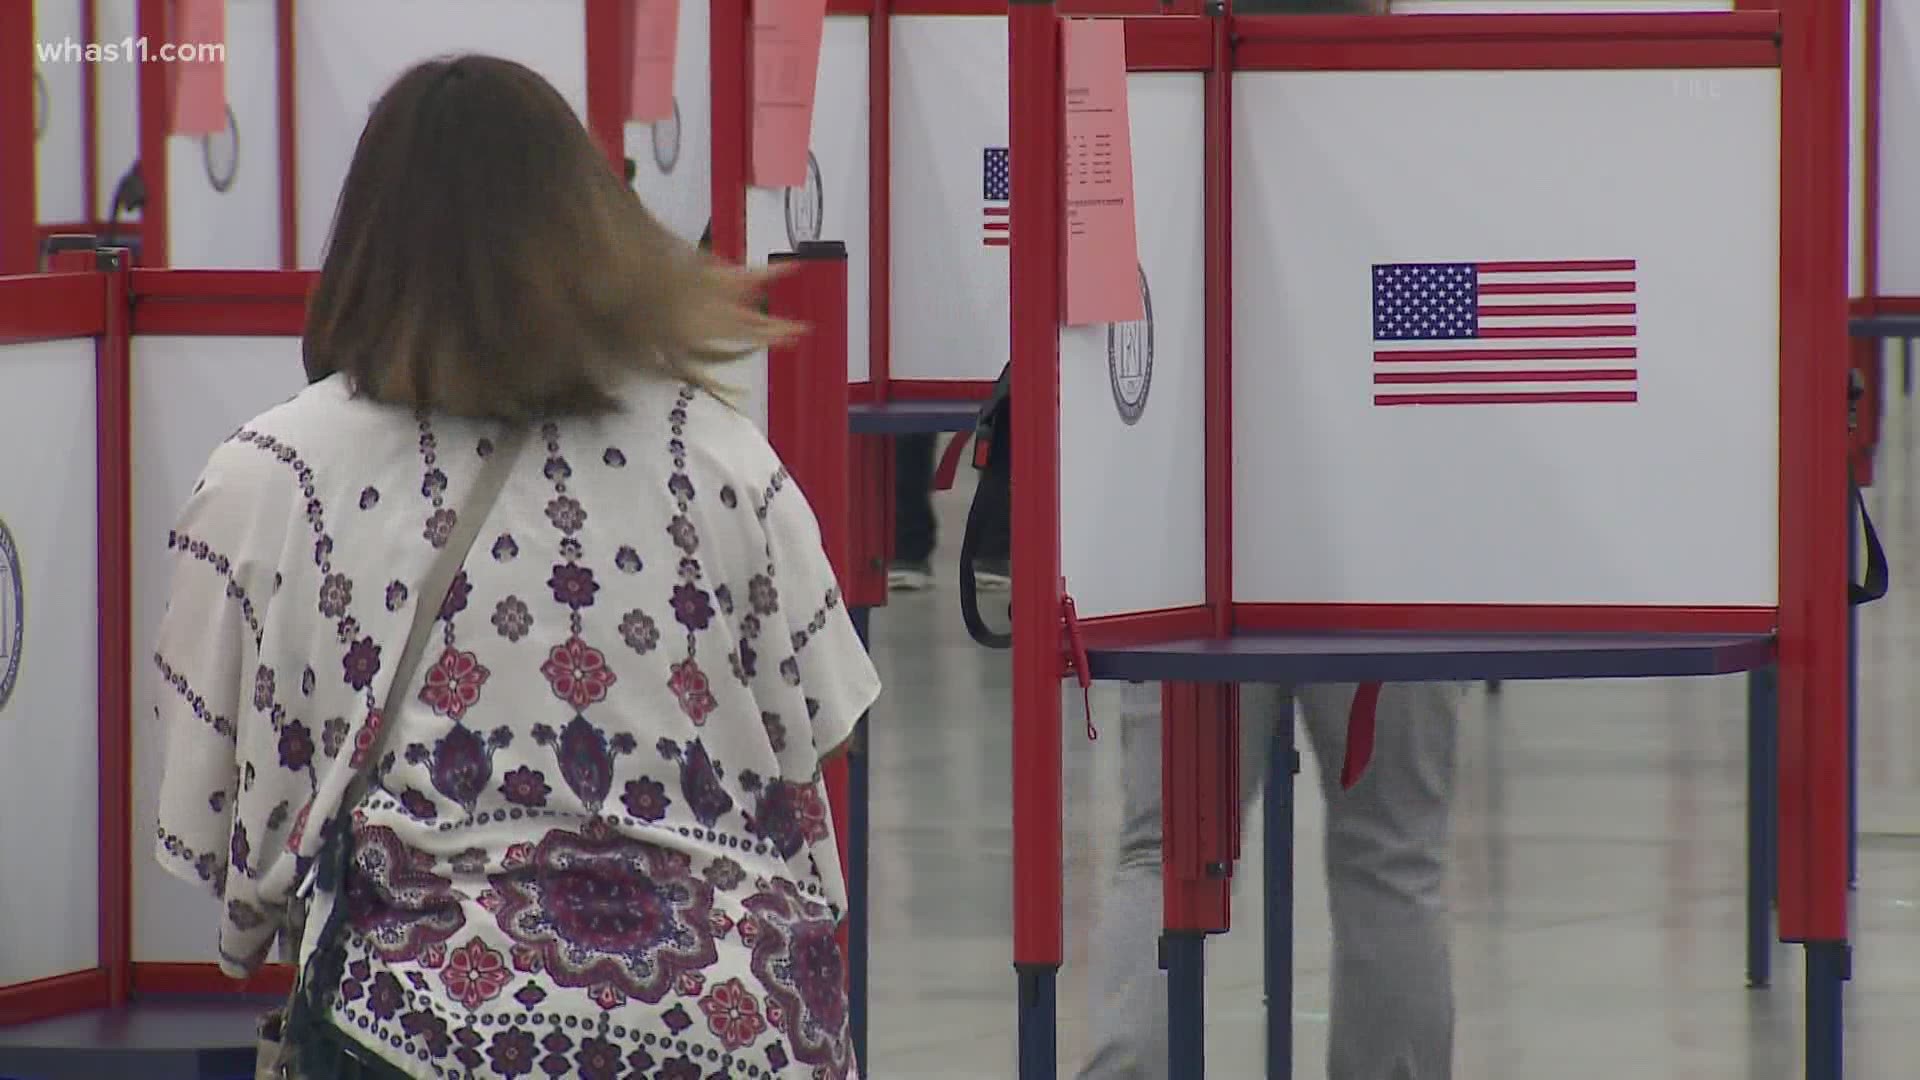 Kentuckians will vote on two constitutional amendments which could mean longer wait times at the polls.